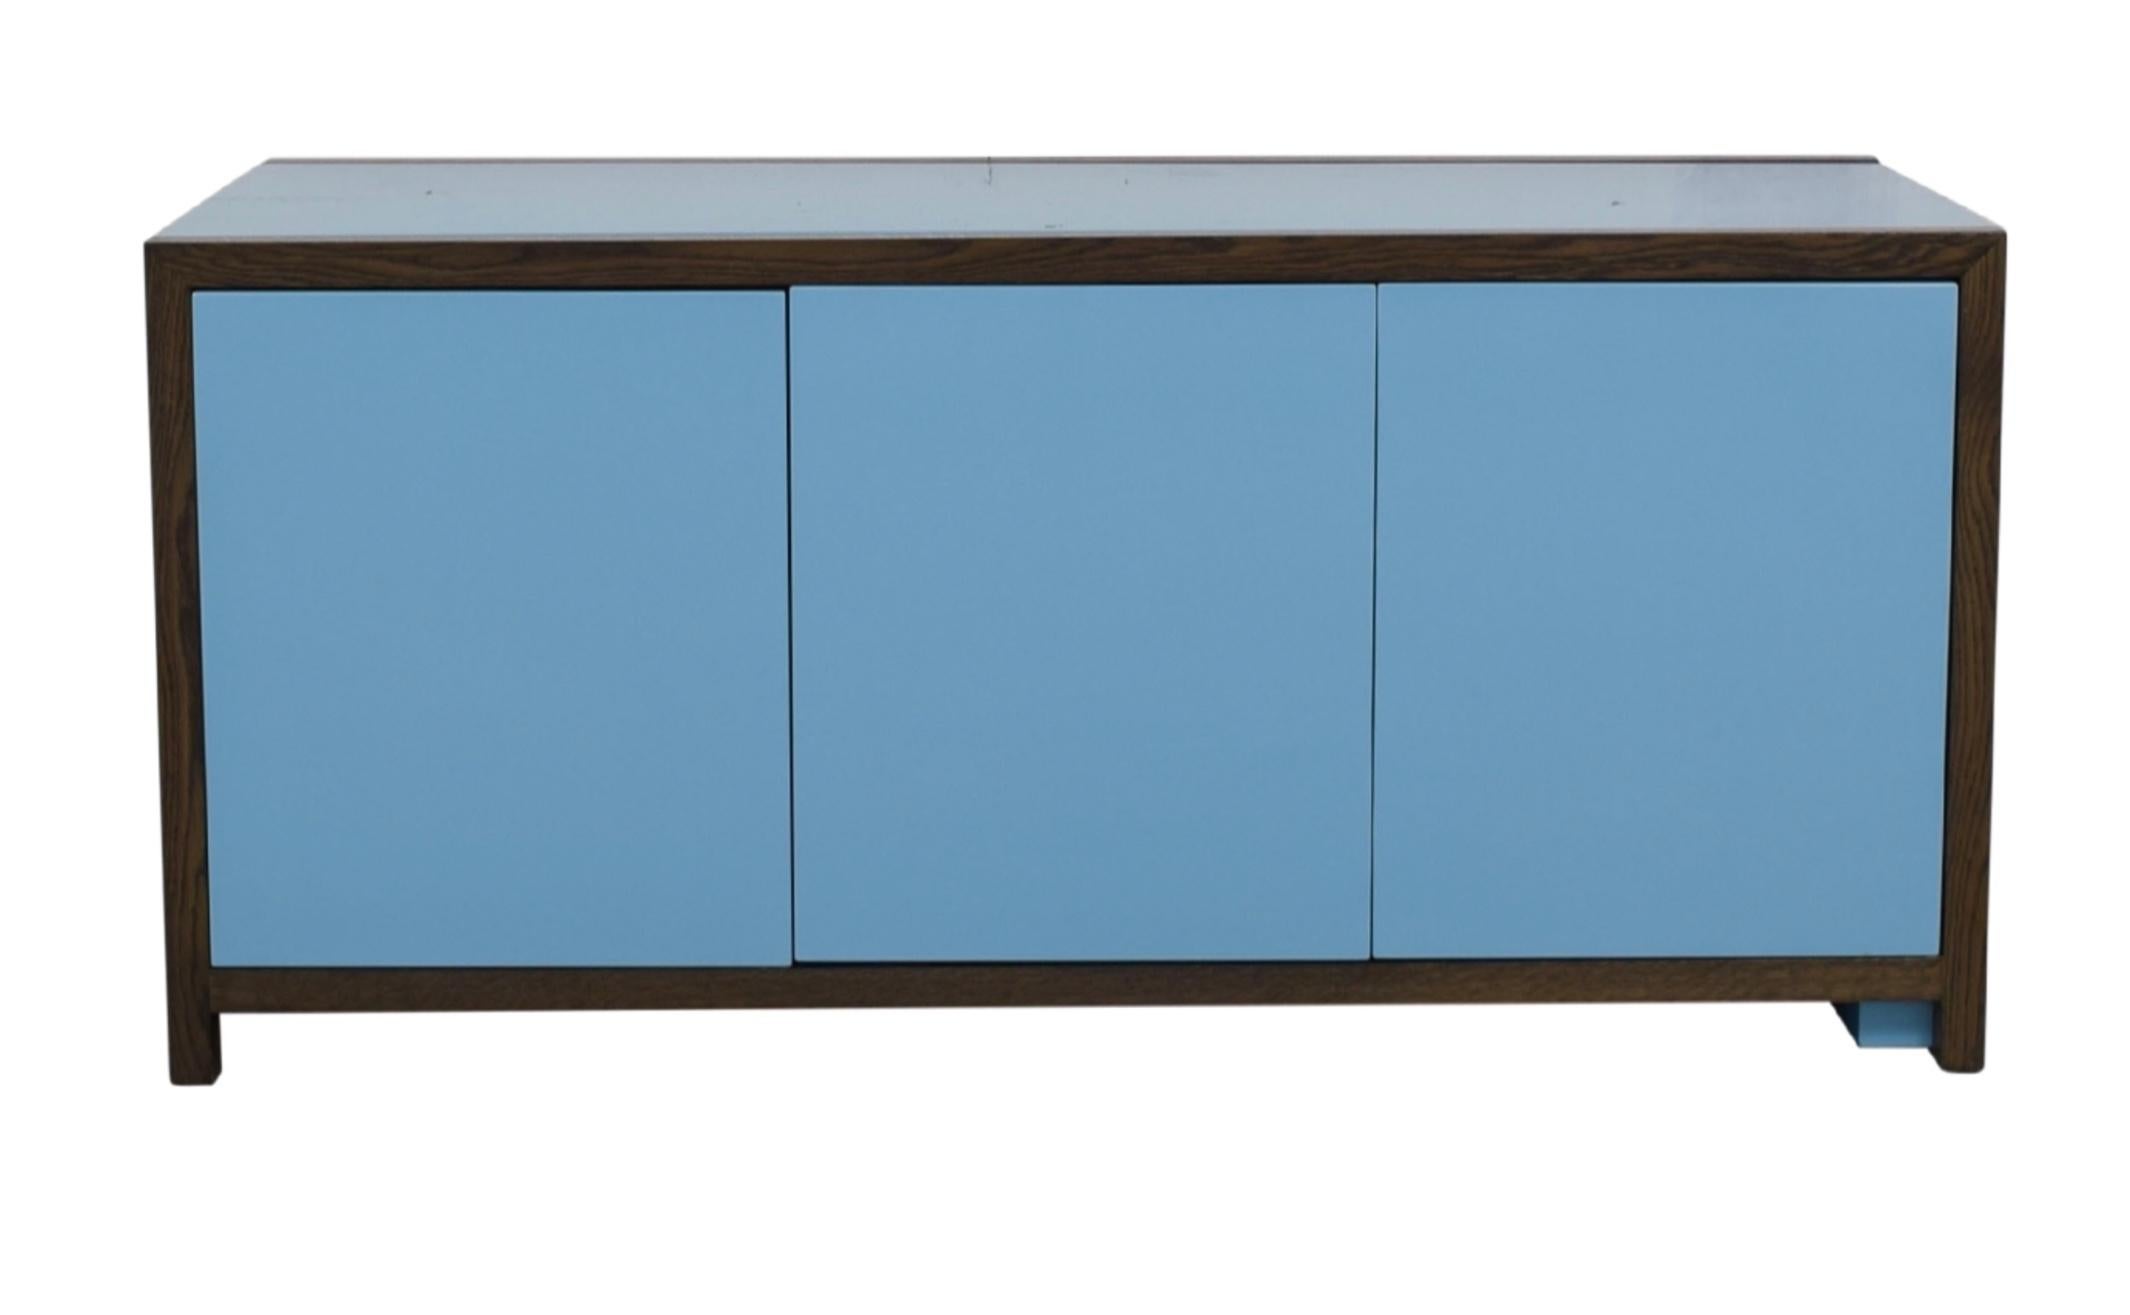 Dune New York Lemans (2000) cabinet/desk in plastic laminate, wood veneer, hi-gloss poly-urethane. Solid wood frame and legs. Top slides to create worksurface. Interior composed of: right door contains one file drawer and two smaller drawers. Center